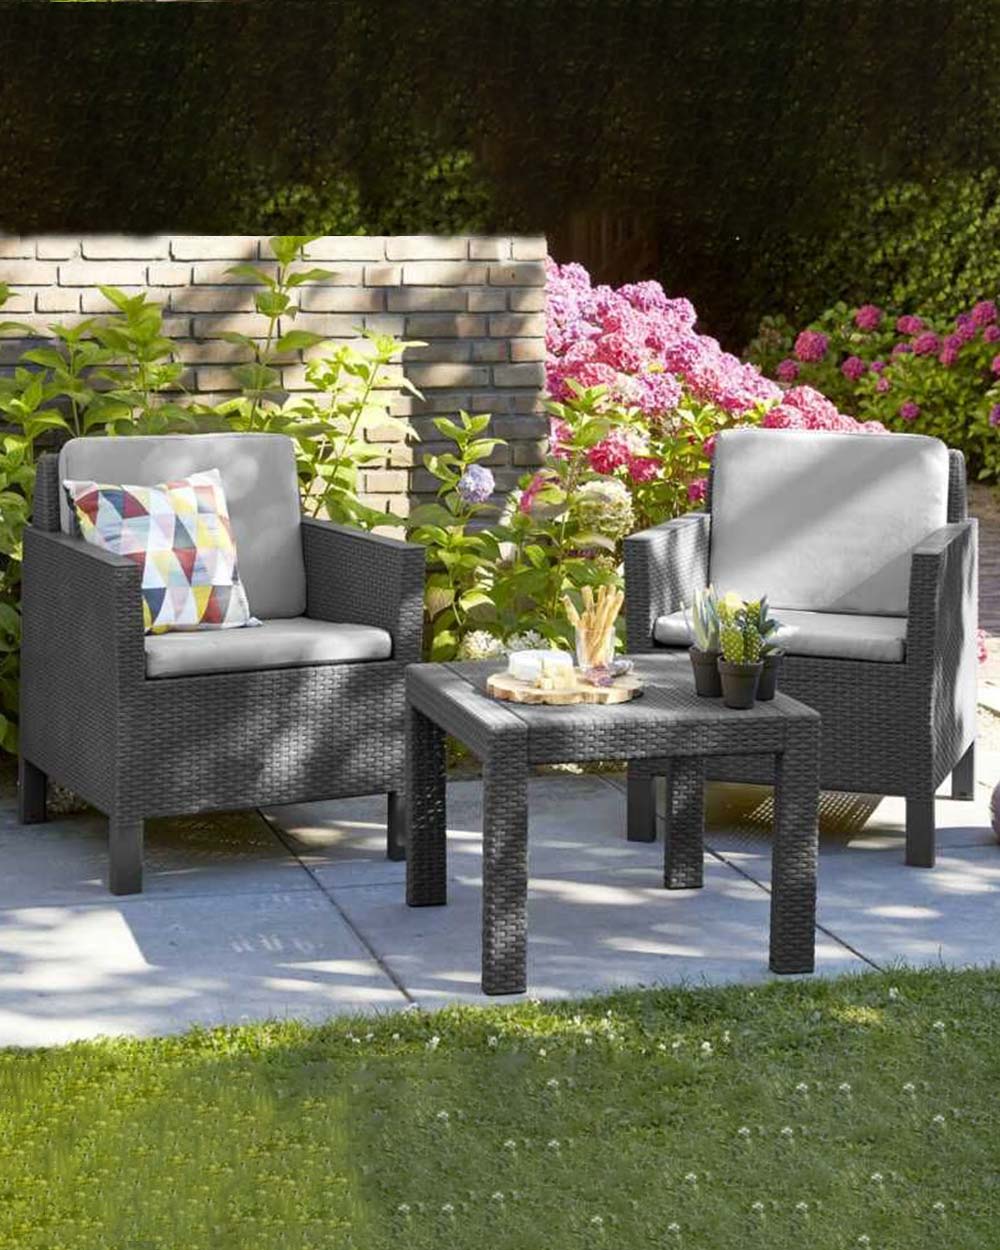 1. Enjoy outdoor relaxation with this stylish rattan bistro set by Keter. Includes table and 2 chairs with cushions, perfect for alfresco dining. 2. Unwind in the sunshine with this modern garden bistro set. Comprising of a table and 2 seats with cushions, it's perfect for any patio or balcony. 3. This hard-wearing bistro set by Keter is perfect for outdoor relaxation. Featuring a table and 2 seats with cushions, it's easy to assemble and low maintenance.